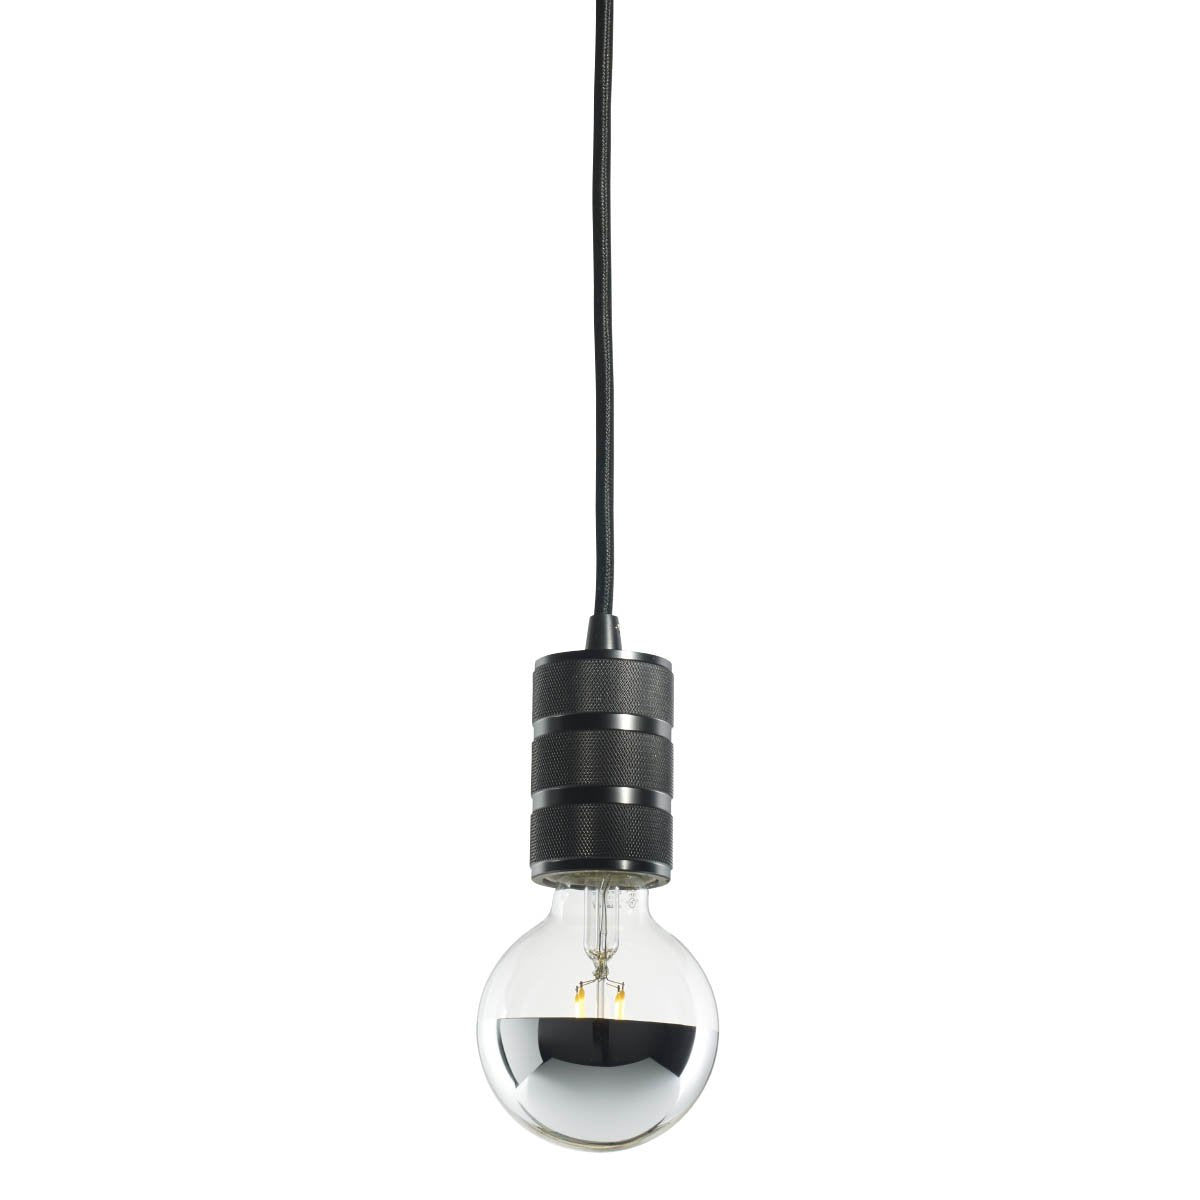 BULBRITE FIXTURES DIRECT WIRE PENDANT KIT INDUSTRIAL GUNMETAL SOCKET WITH BLACK CORD AND LED G25 MEDIUM SCREW (E26) 5W FULLY COMPATIBLE DIMMING FILAMENT HALF MIRROR LIGHT BULB 2700K/WARM WHITE 40W INCANDESCENT EQUIVALENT 1PK (810090)